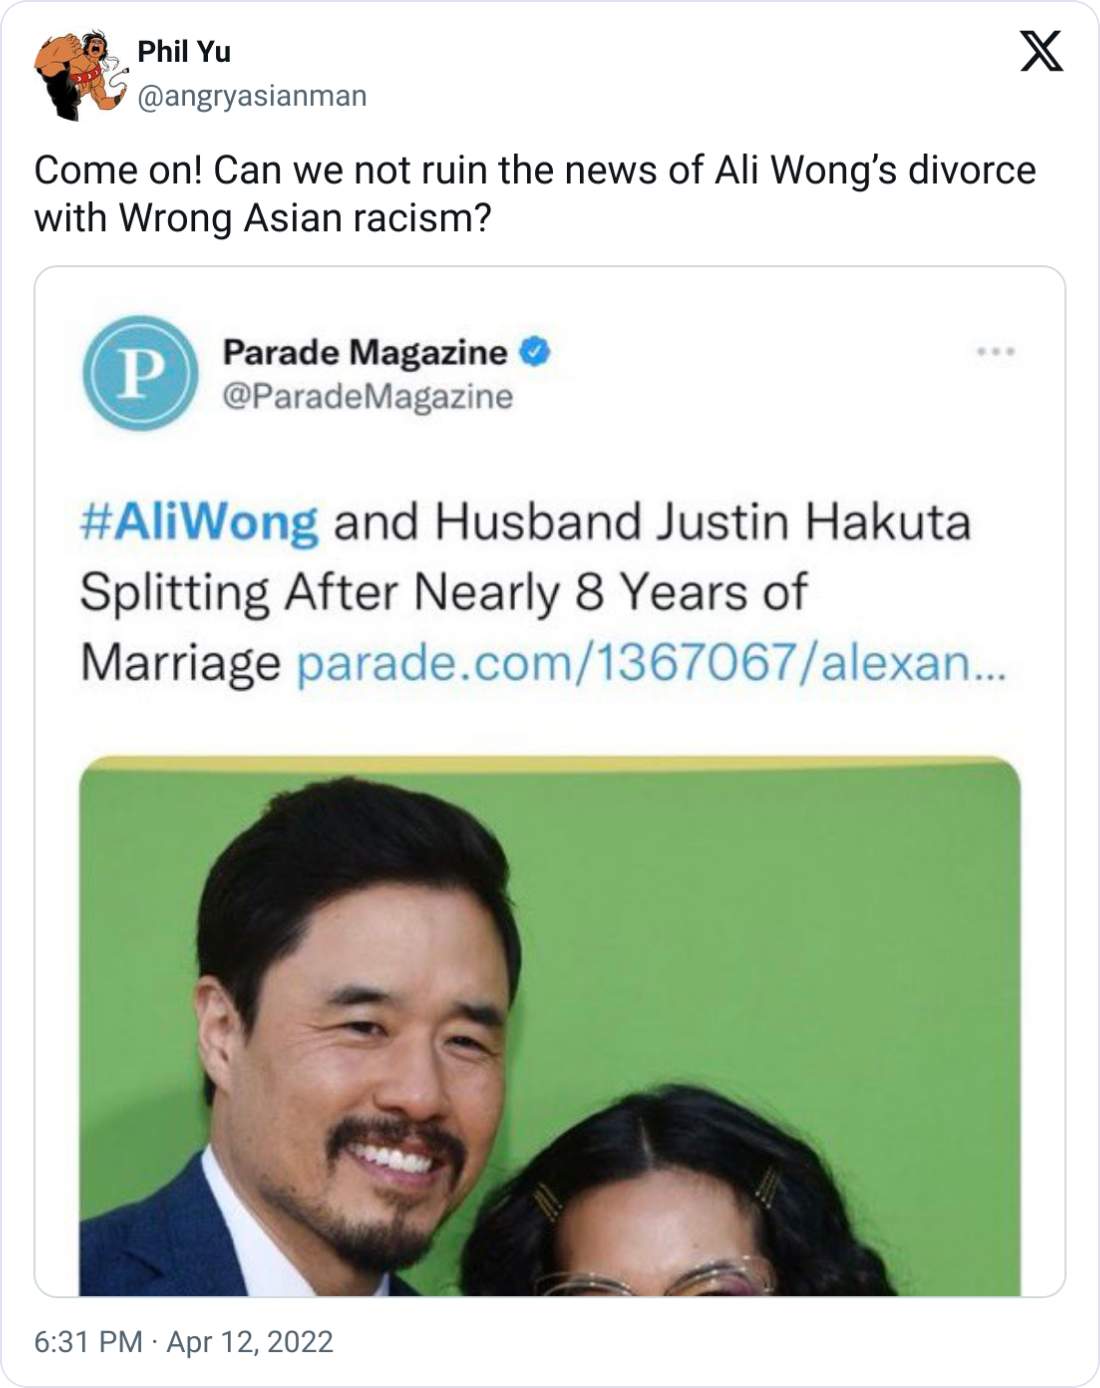 tweet from @angryasianman pointing out Parade Magazine's mistaking Randall Park for Justin Hakuta